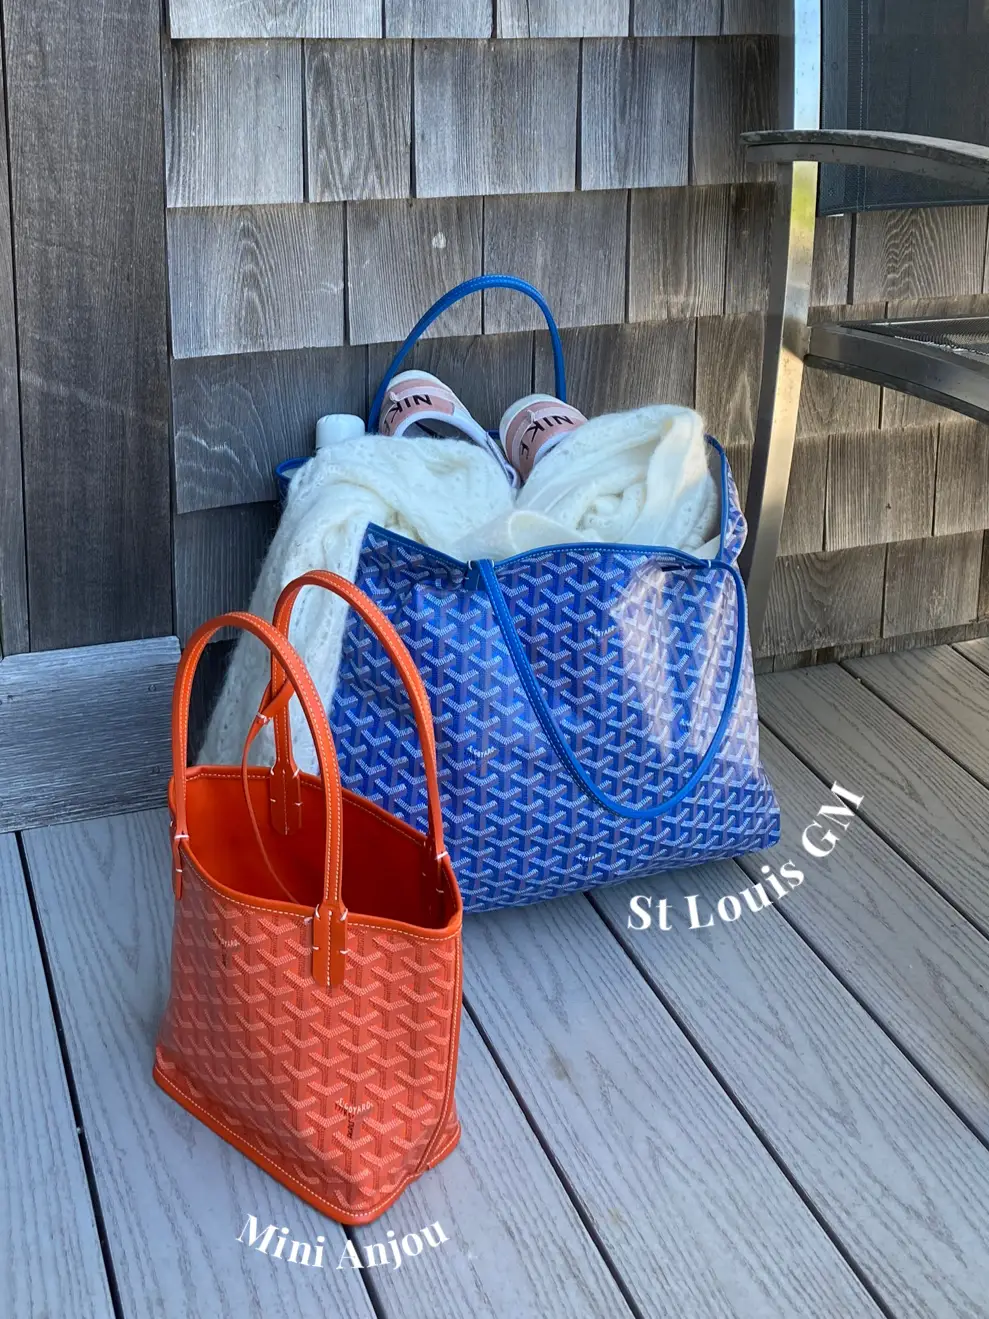 pros & cons of the goyard St. Louis, Gallery posted by Fran Acciardo